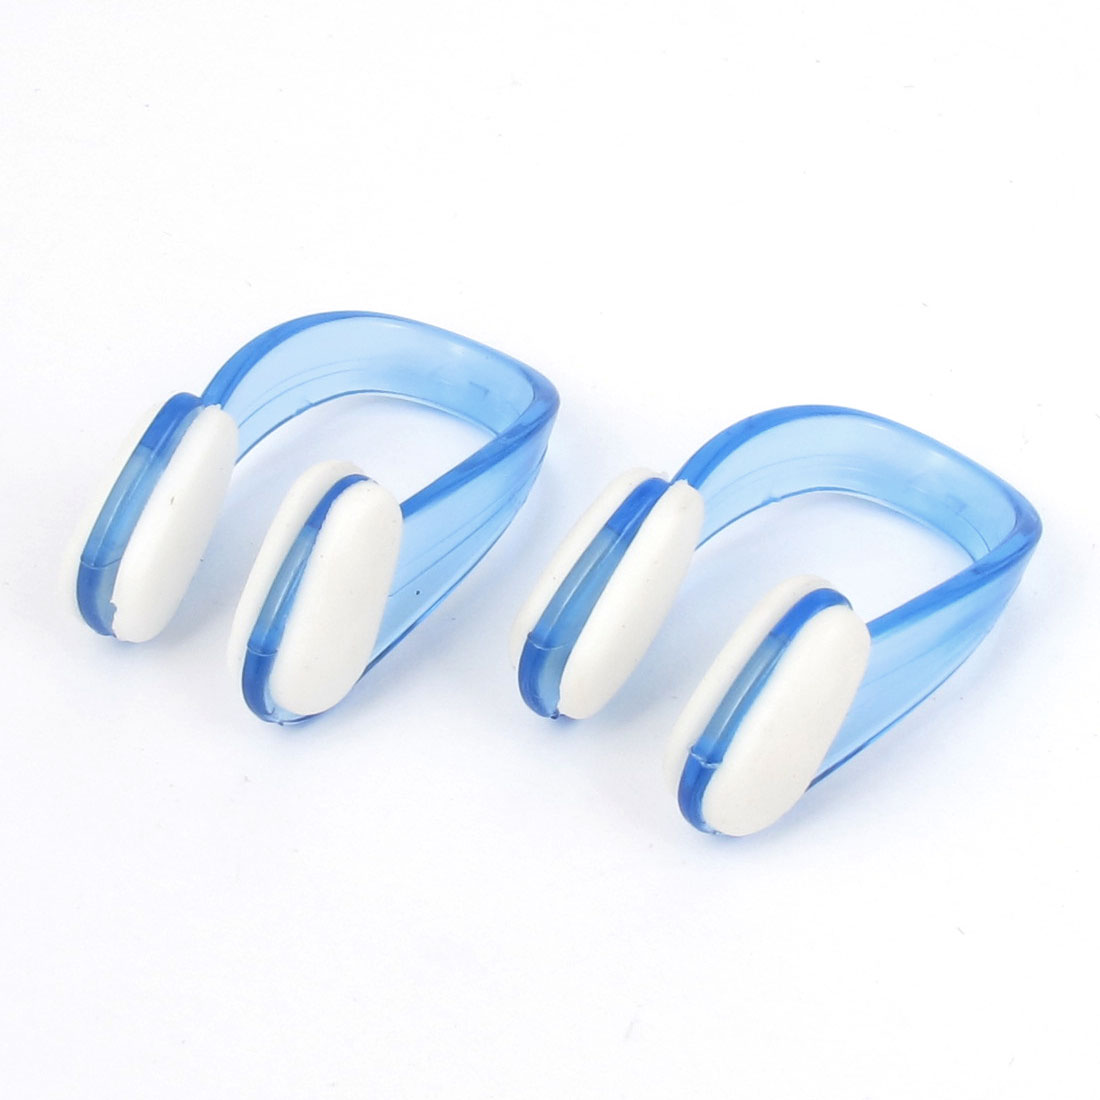 SODIAL Swimming Diving Waterproof Nasal Splint Nose Clip Blue White 2 Pieces